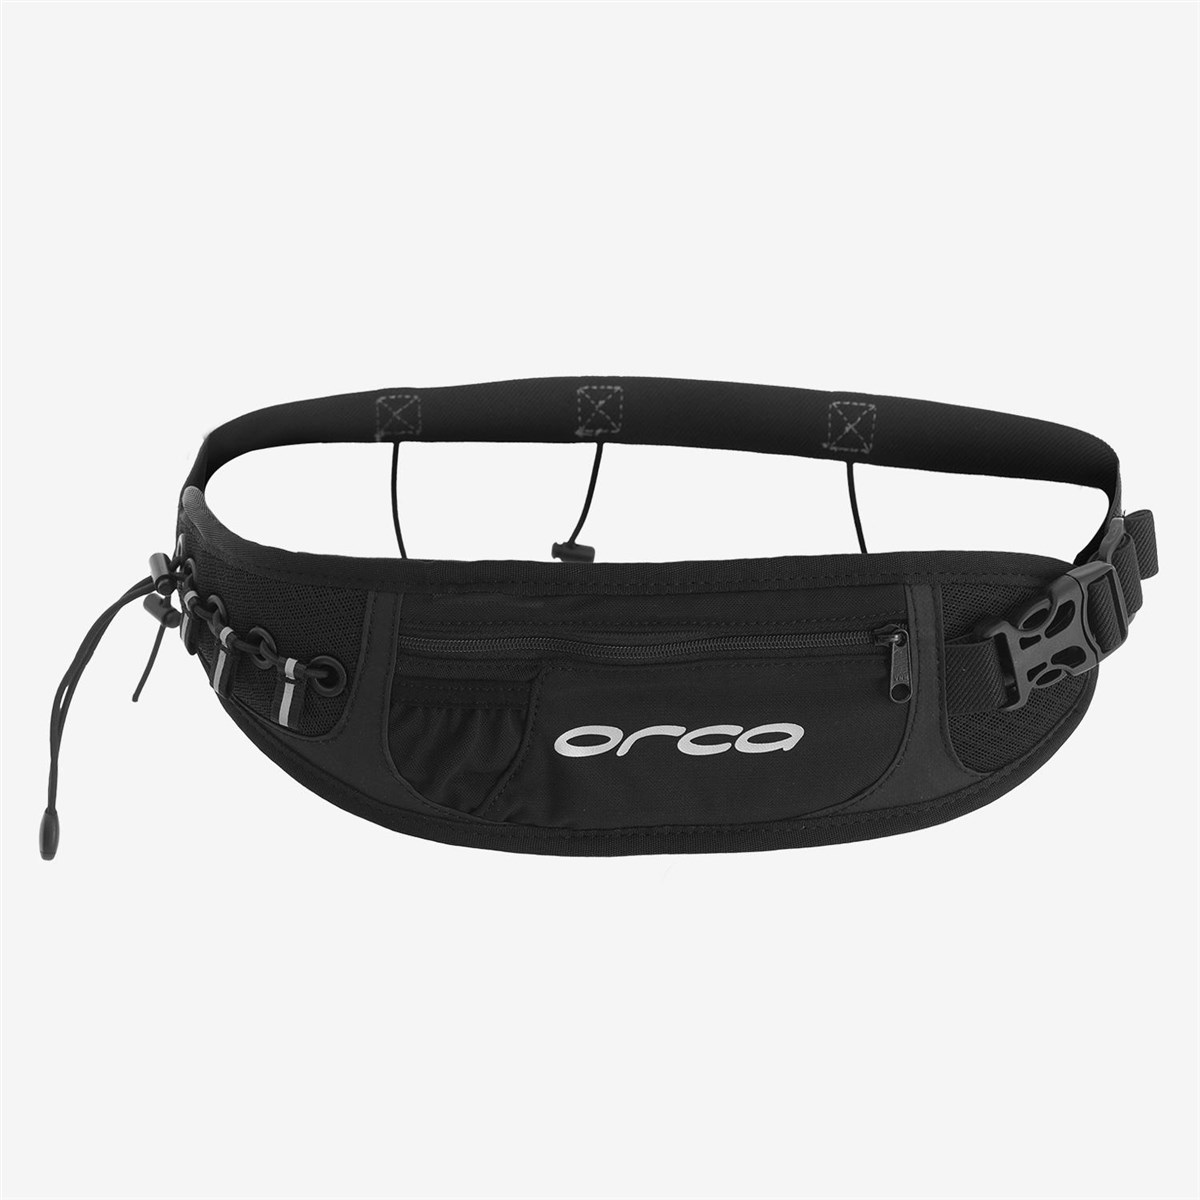 Orca Race Belt With Pocket product image